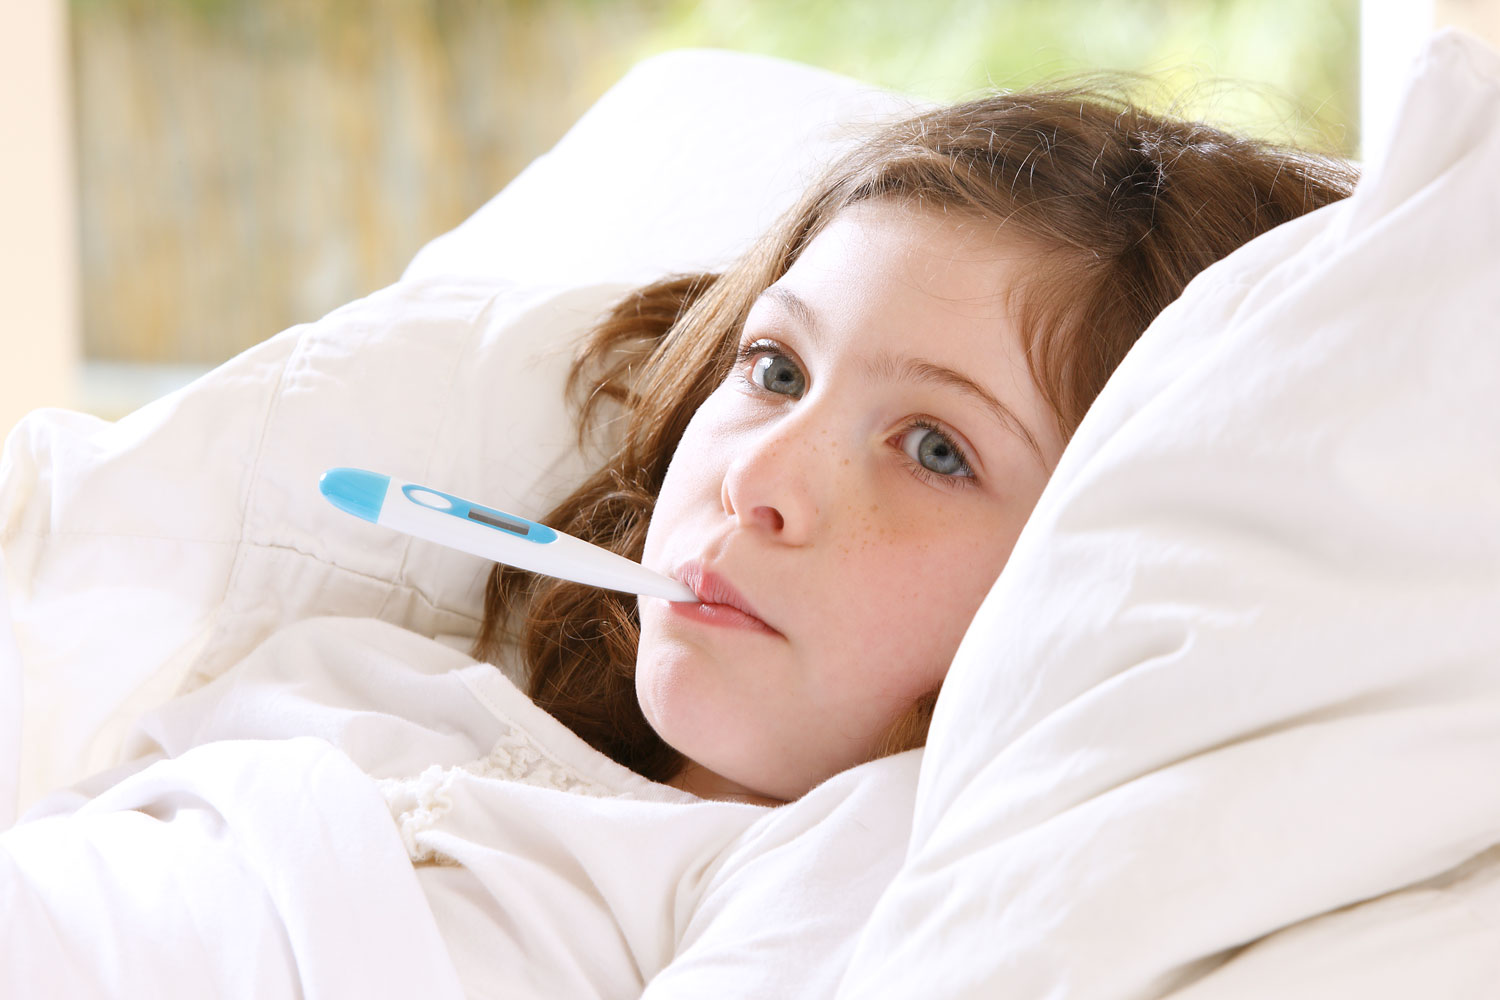 Girl in bed with thermometer in mouth (Getty Images)